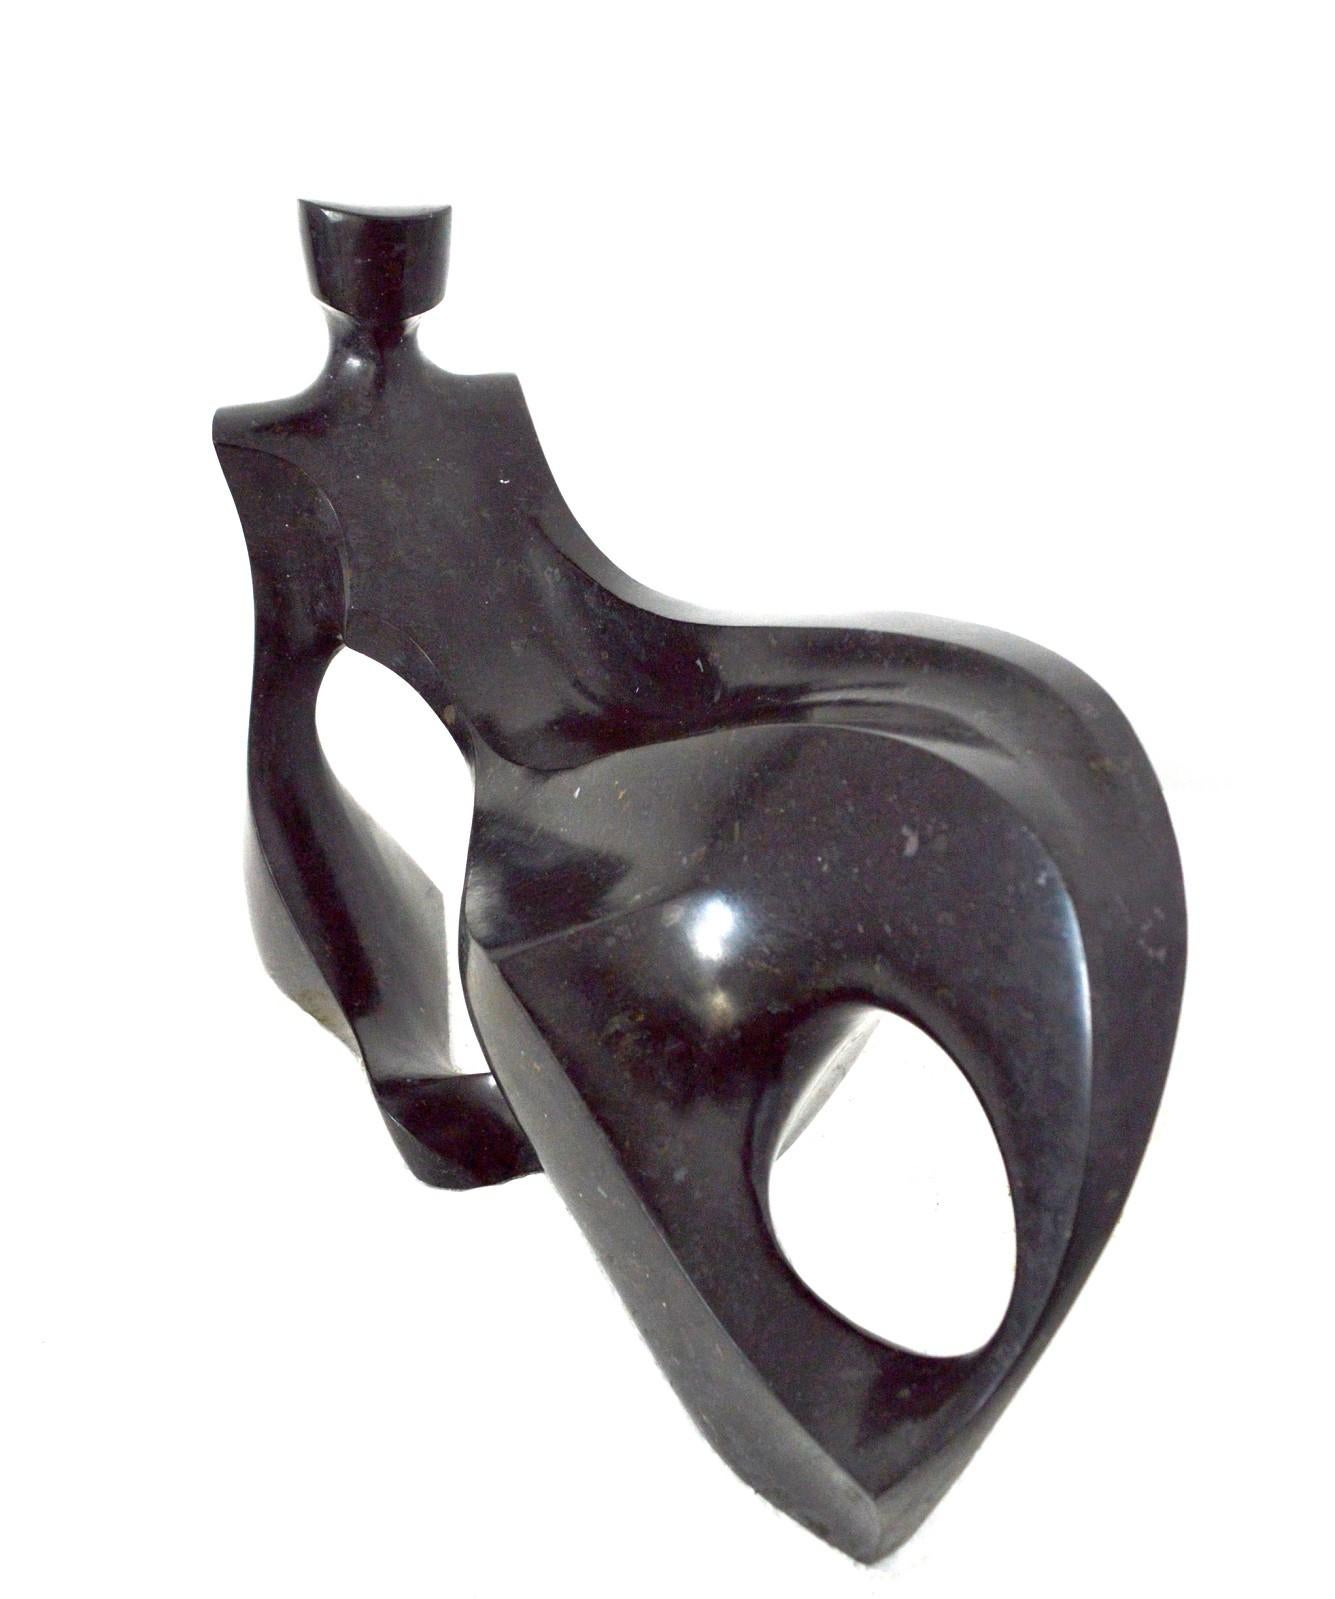 Jeremy Guy Abstract Sculpture - Repose 6/50 - smooth, black granite, figurative, tabletop sculpture